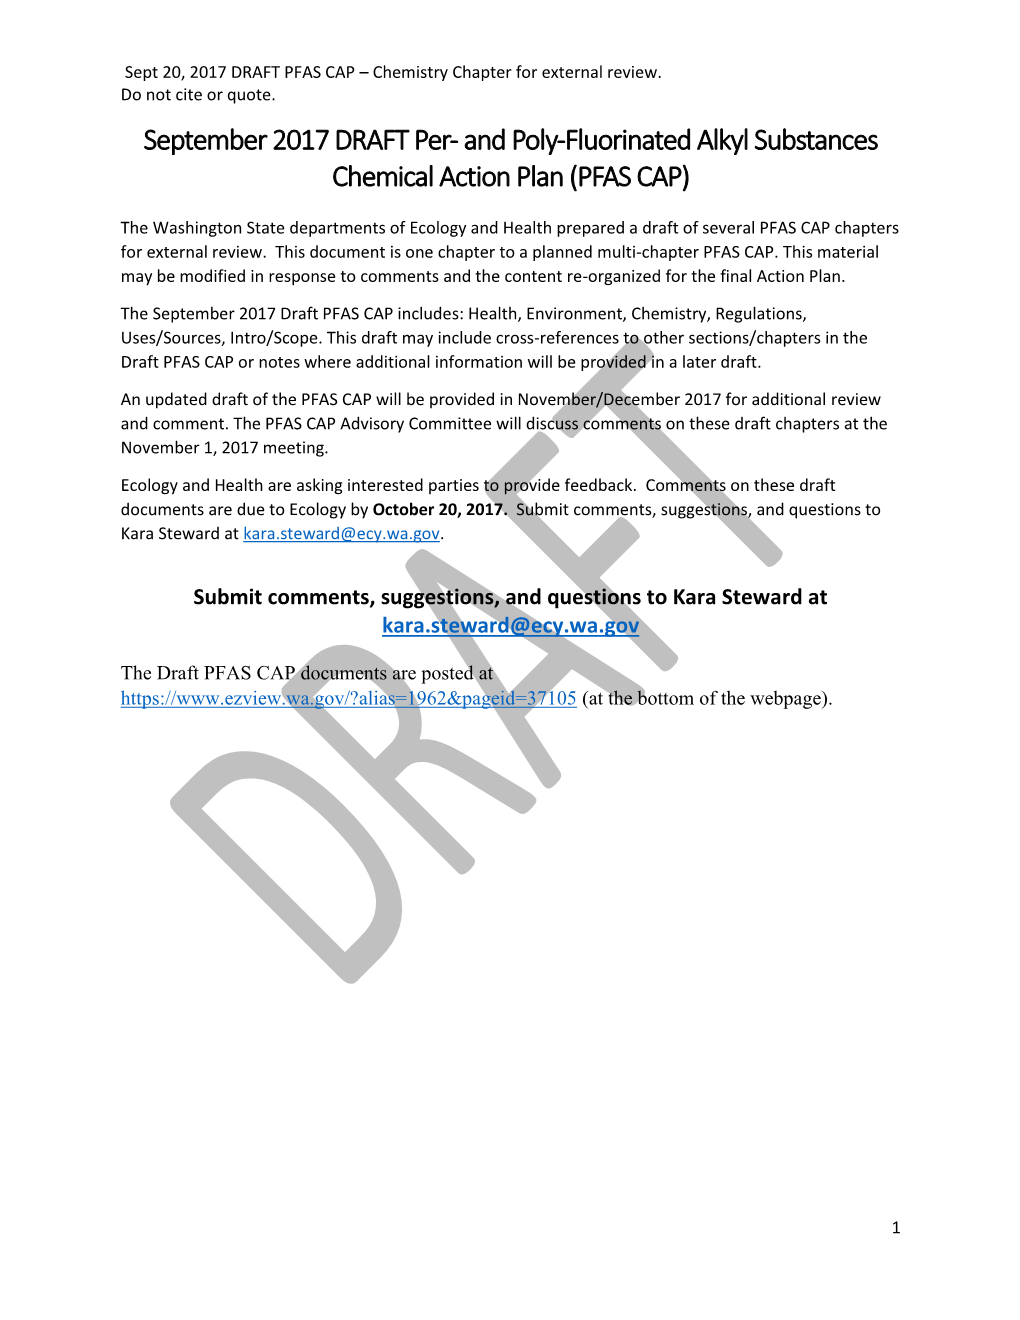 September 2017 DRAFT Per- and Poly-Fluorinated Alkyl Substances Chemical Action Plan (PFAS CAP)